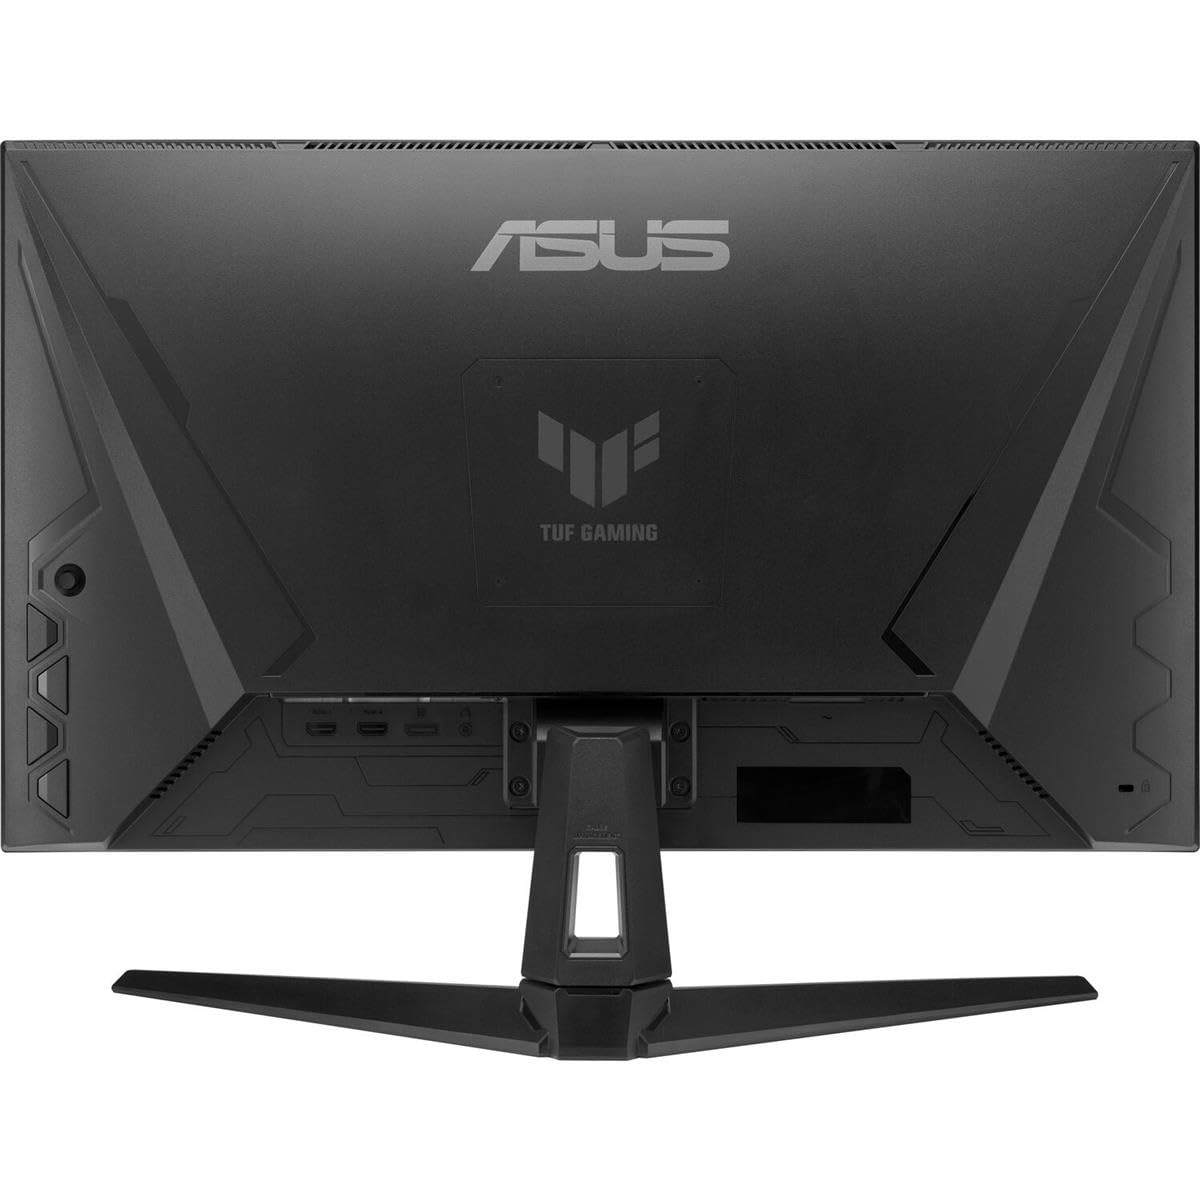 ASUS TUF Gaming 27” 1440P Gaming Monitor (VG27AQM1A) - QHD (2560 x 1440), 260Hz, 1ms, Fast IPS, Extreme Low Motion Blur Sync, Freesync Premium, G-SYNC Compatible, DisplayHDR400, 3 Year Warranty